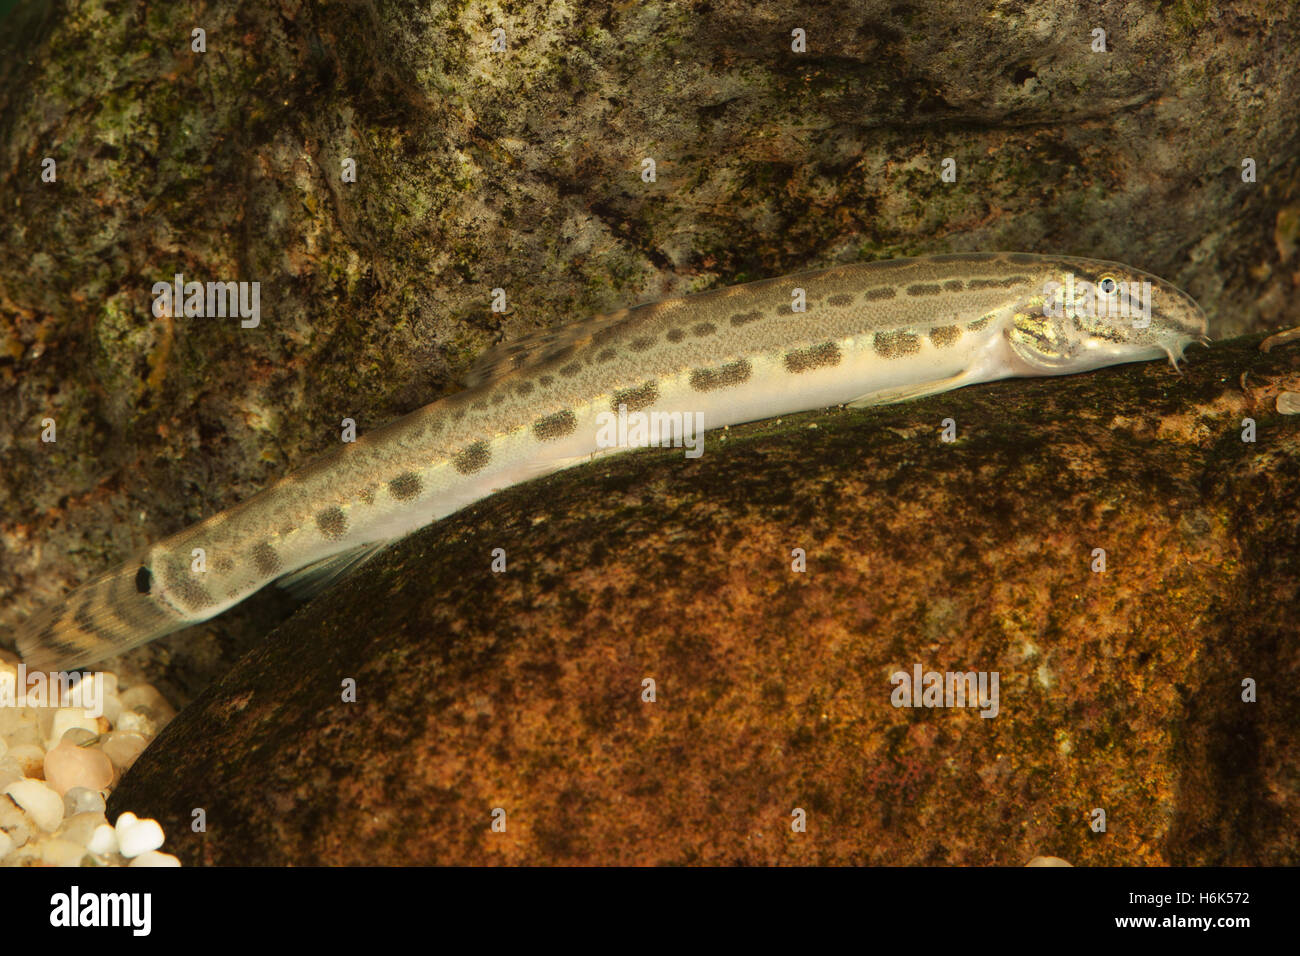 The Spined Loach (Cobitis taenia) Stock Photo